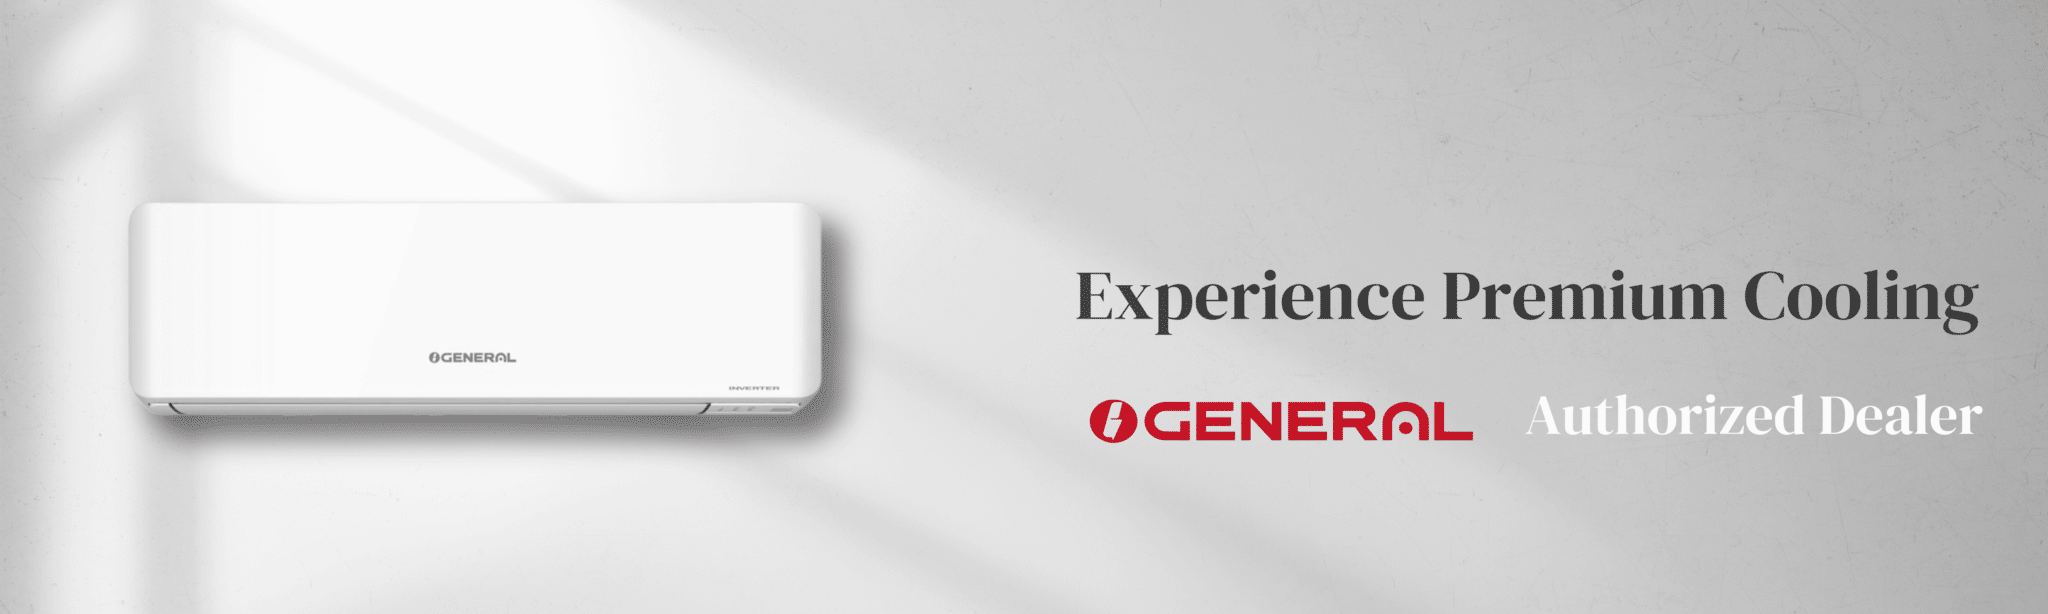 O general - Experience premium cooling